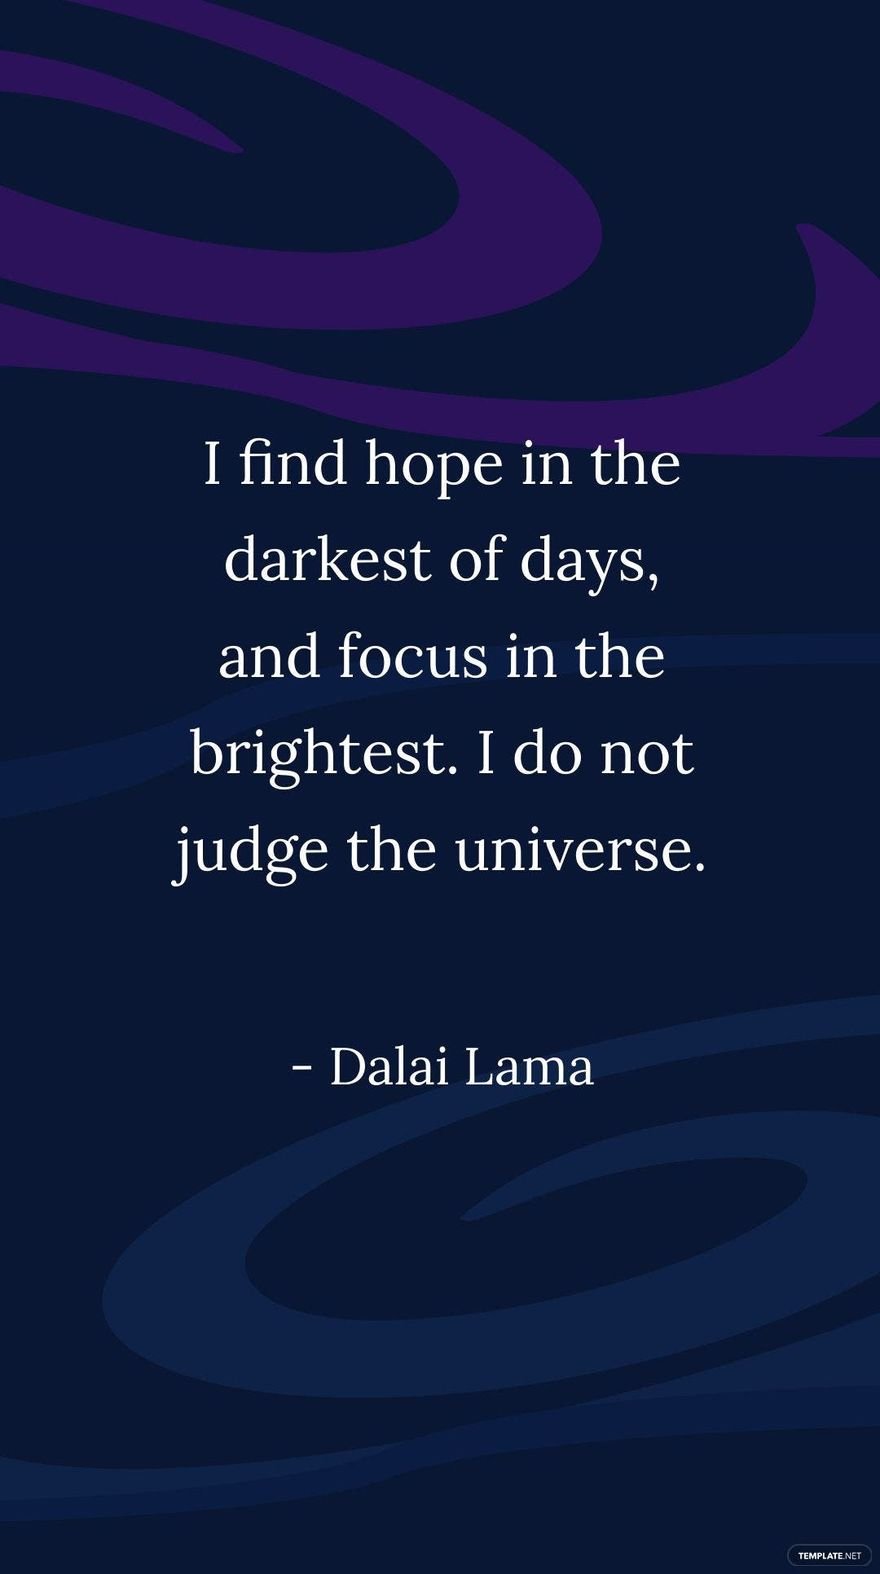 Dalai Lama - I find hope in the darkest of days, and focus in the brightest. I do not judge the universe.